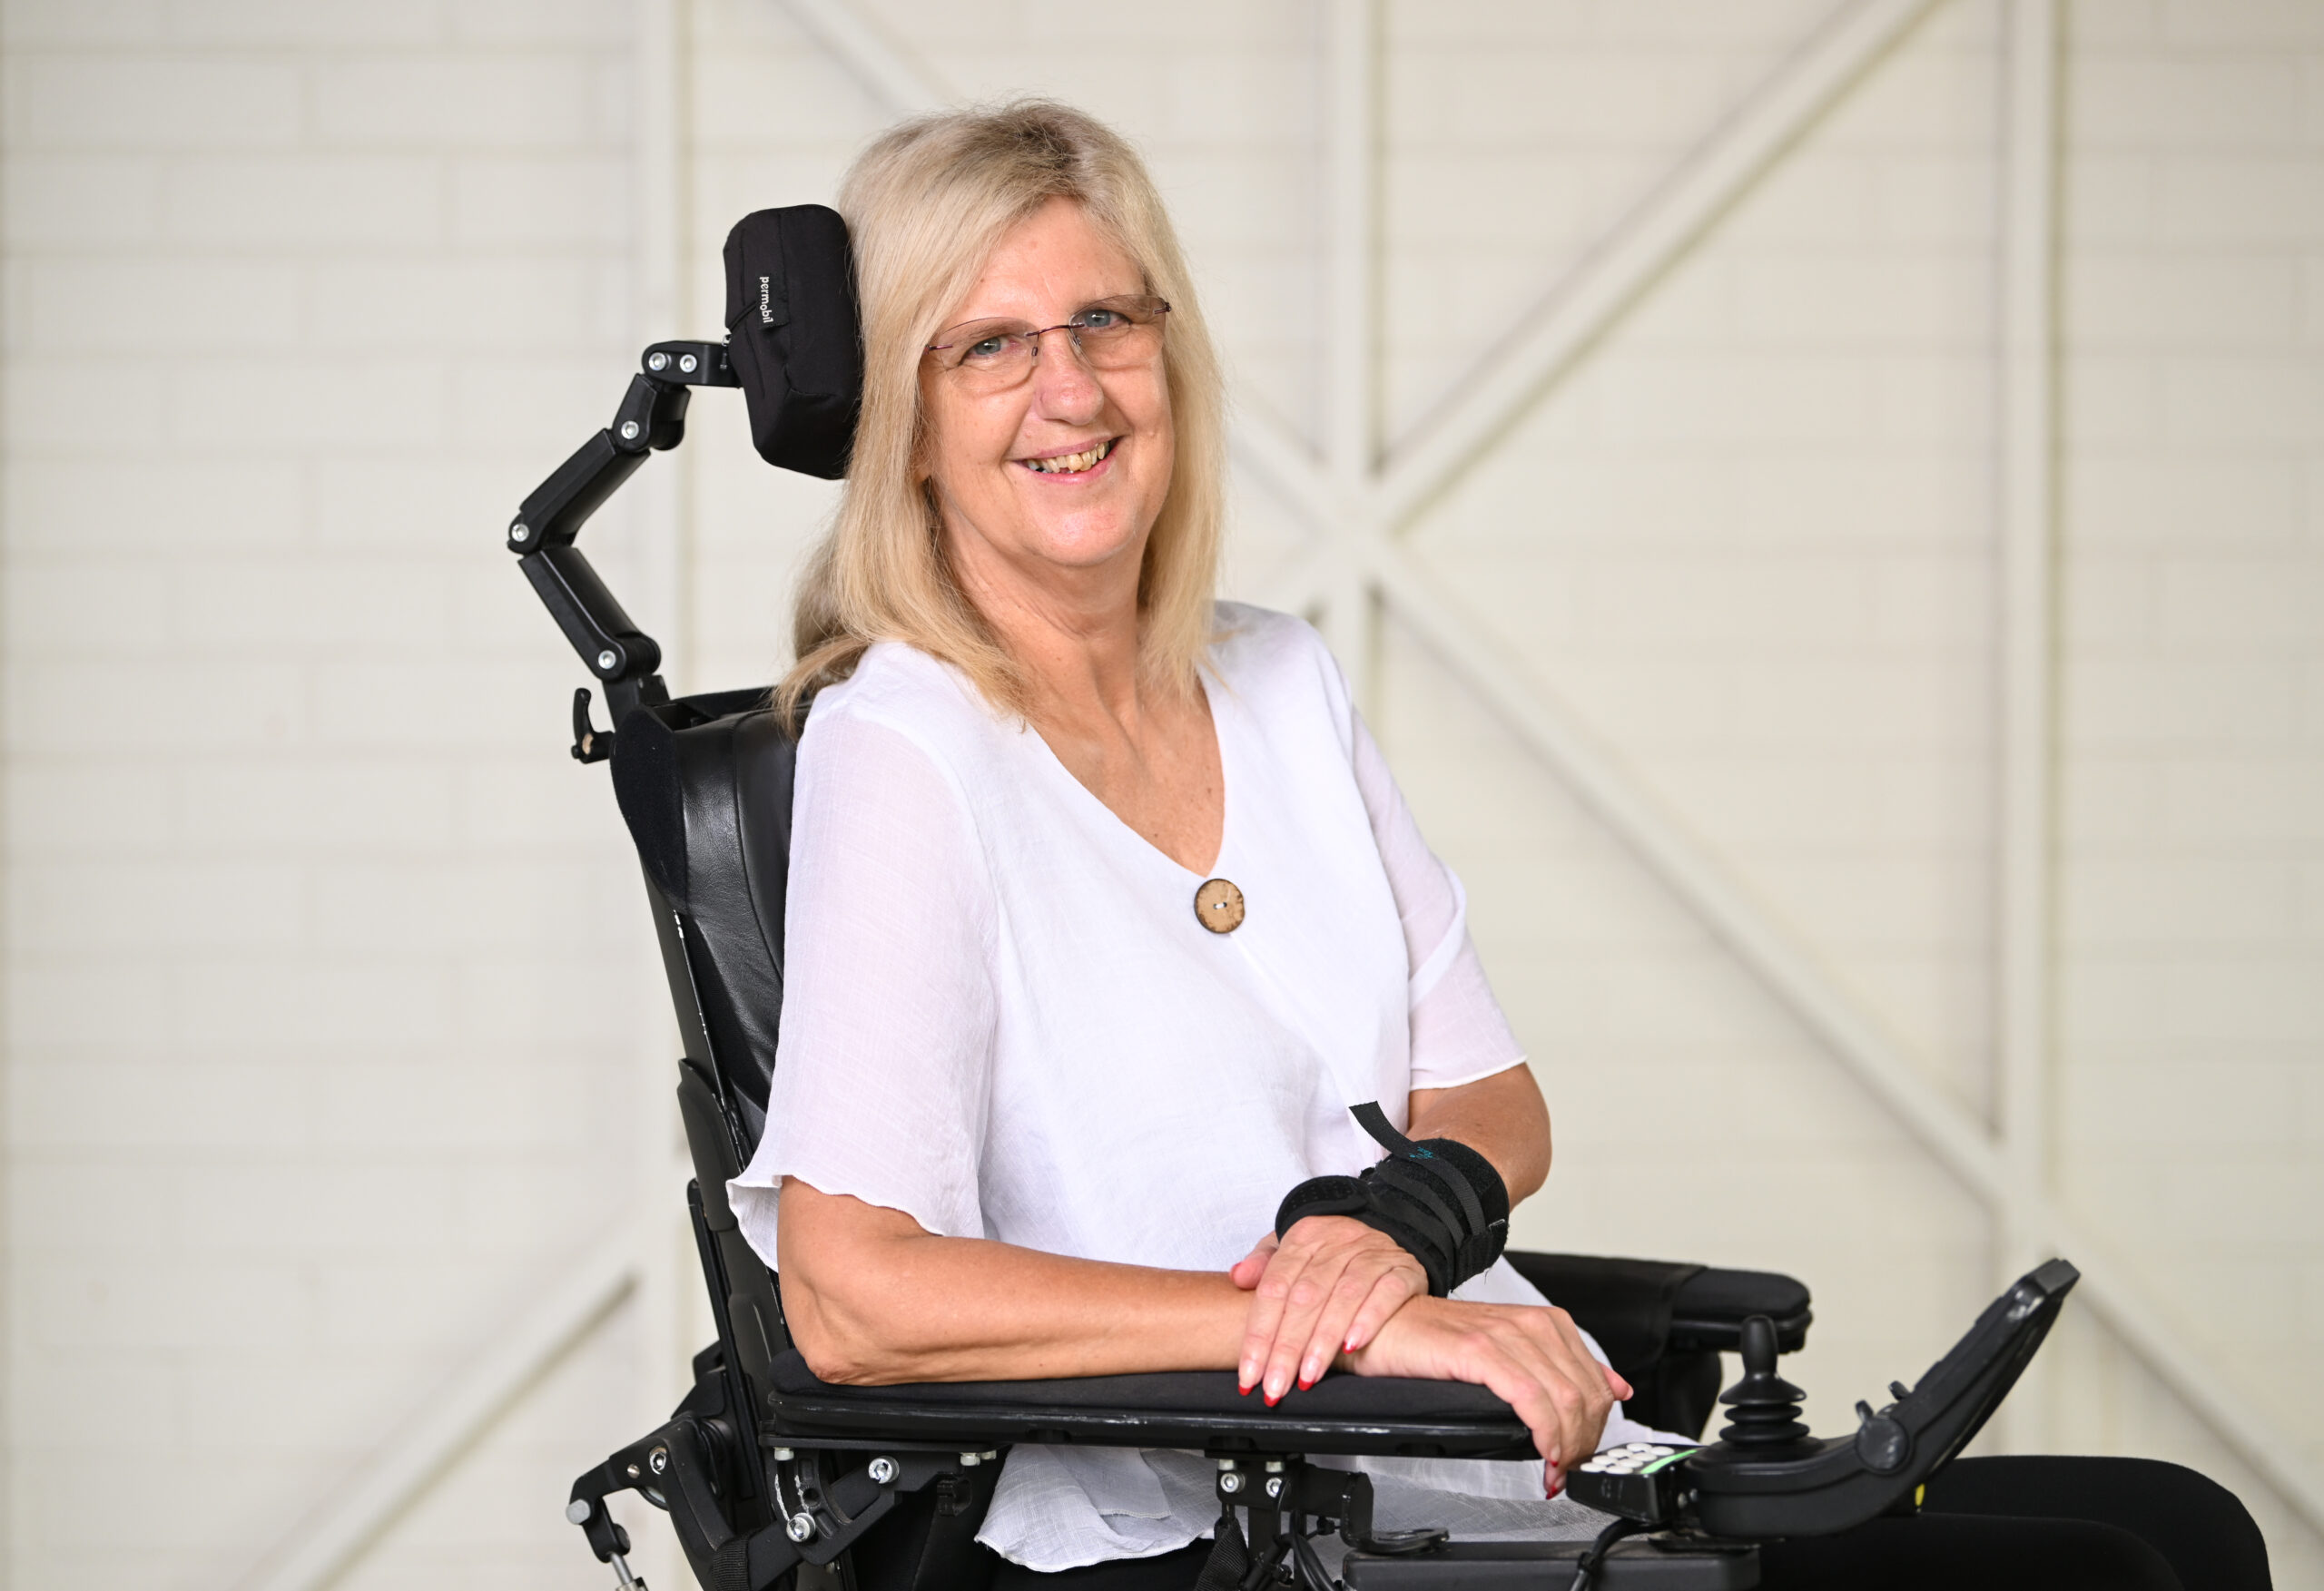 A woman sitting on her wheelchair smiling at the camera